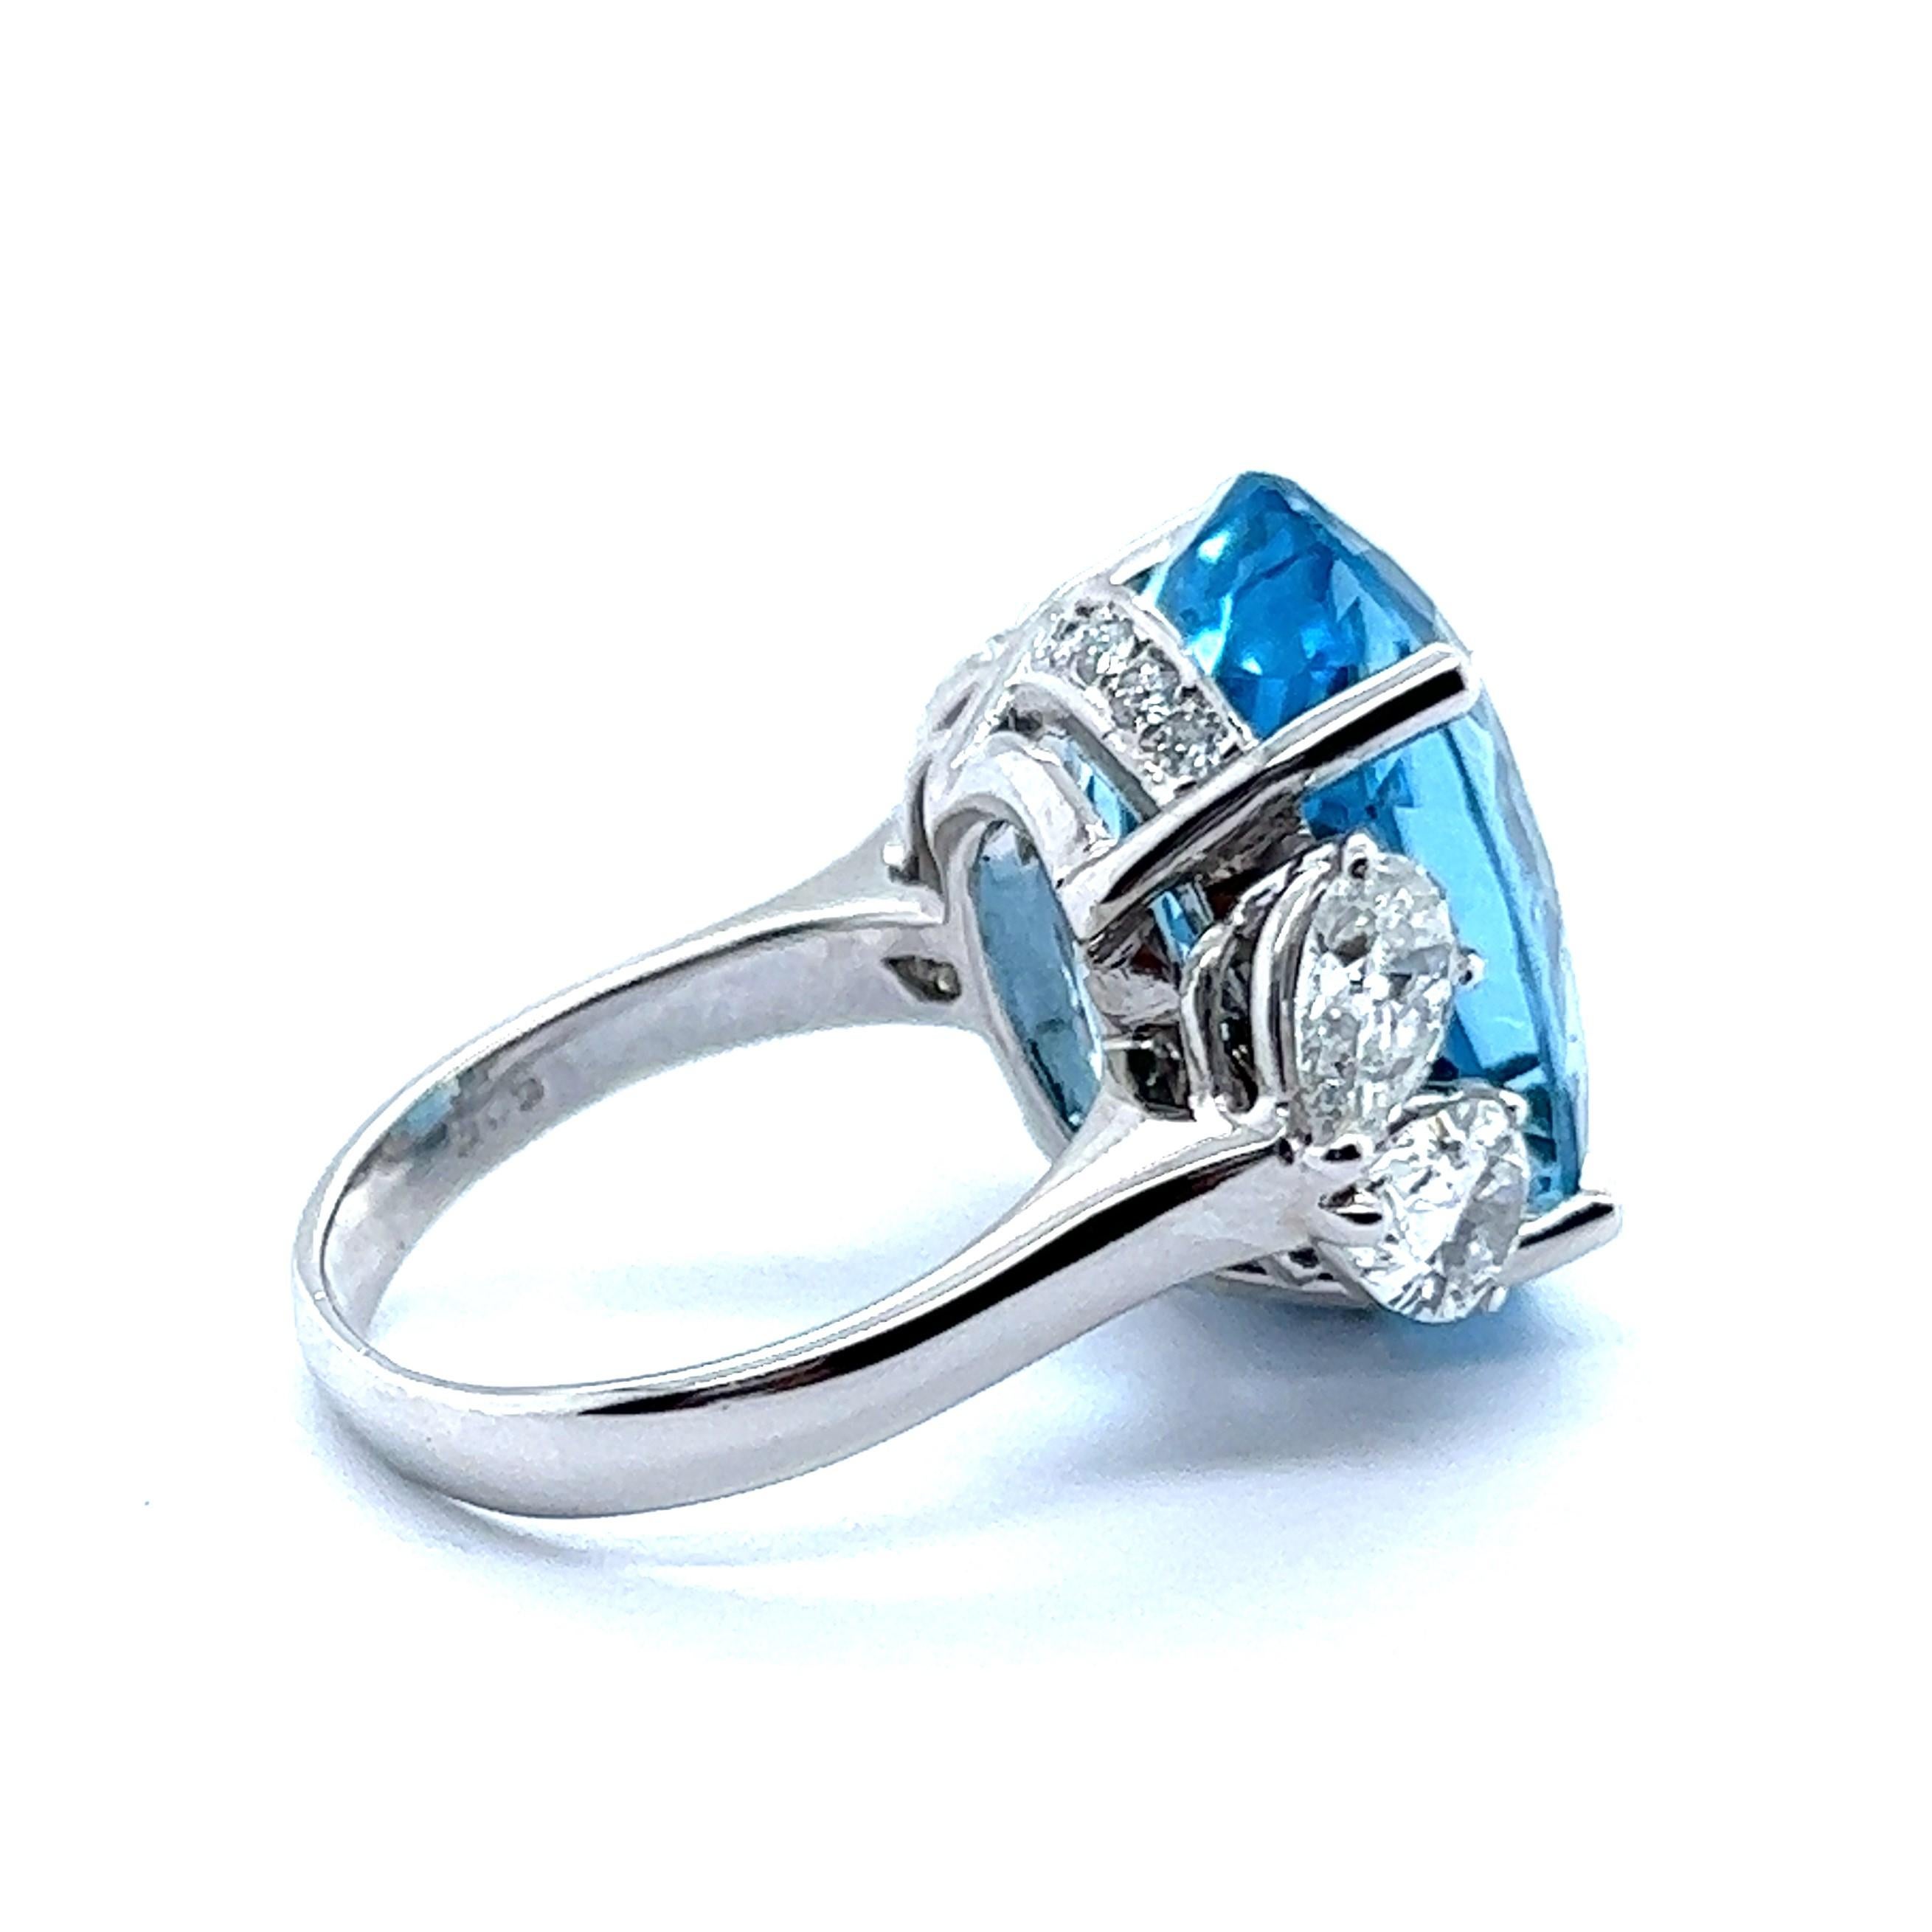 Aquamarine Ring with Diamonds in 14 Karat White Gold In Excellent Condition For Sale In Lucerne, CH